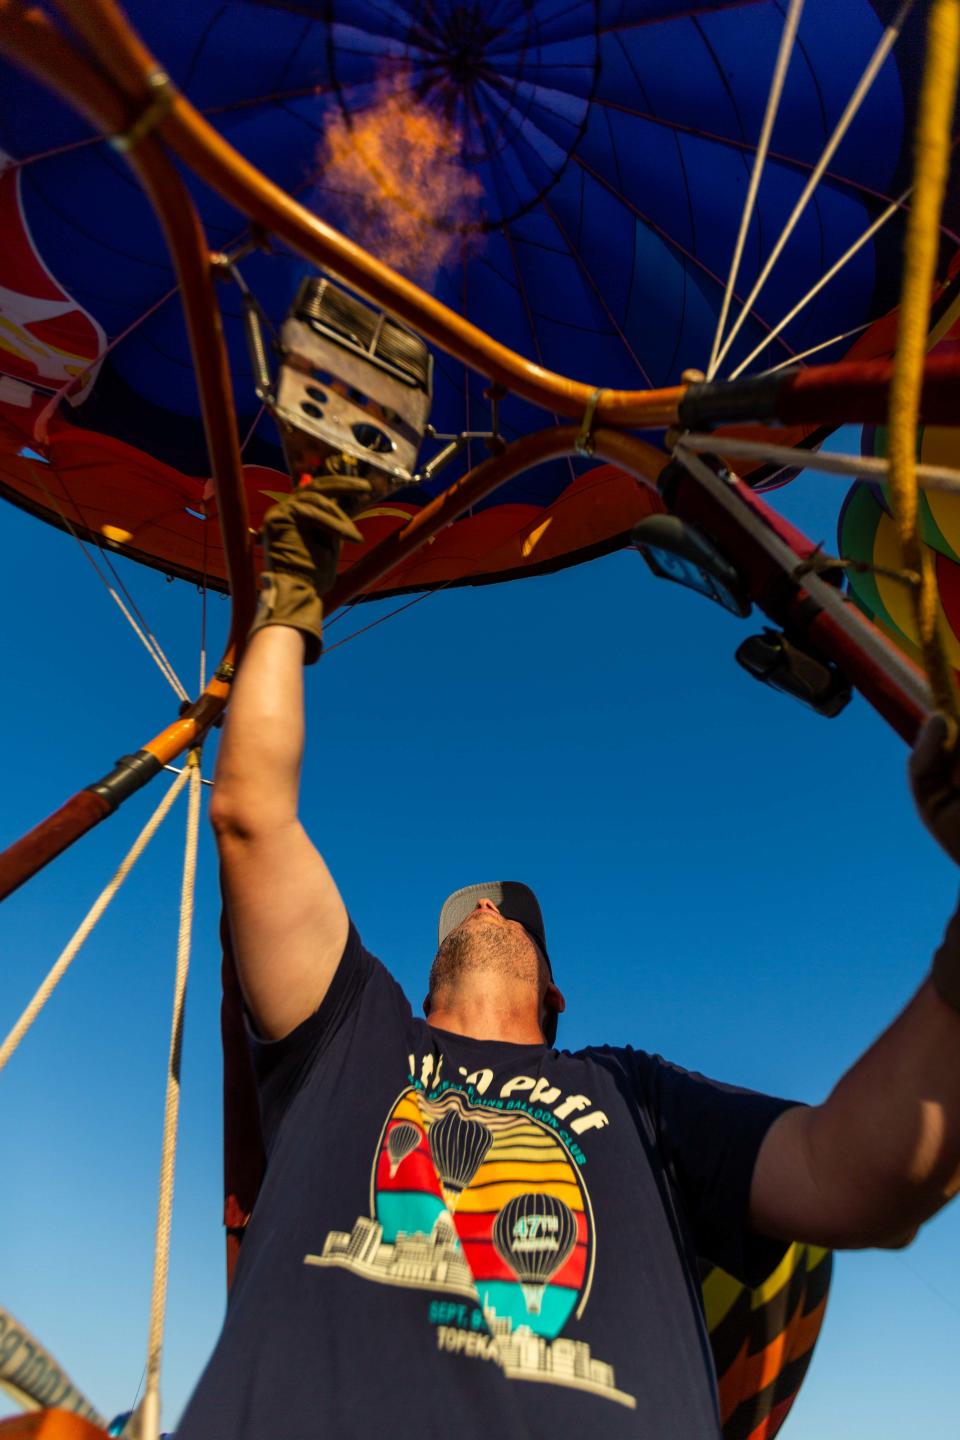 Above southwest Topeka, Tony Goodnow fires the burner on the Libertas hot air balloon. Goodnow, now 47, has grown up around hot air balloons all his life, and he pointed out the west Topeka field from which his late father allowed him to pilot his first solo flight at age 16.